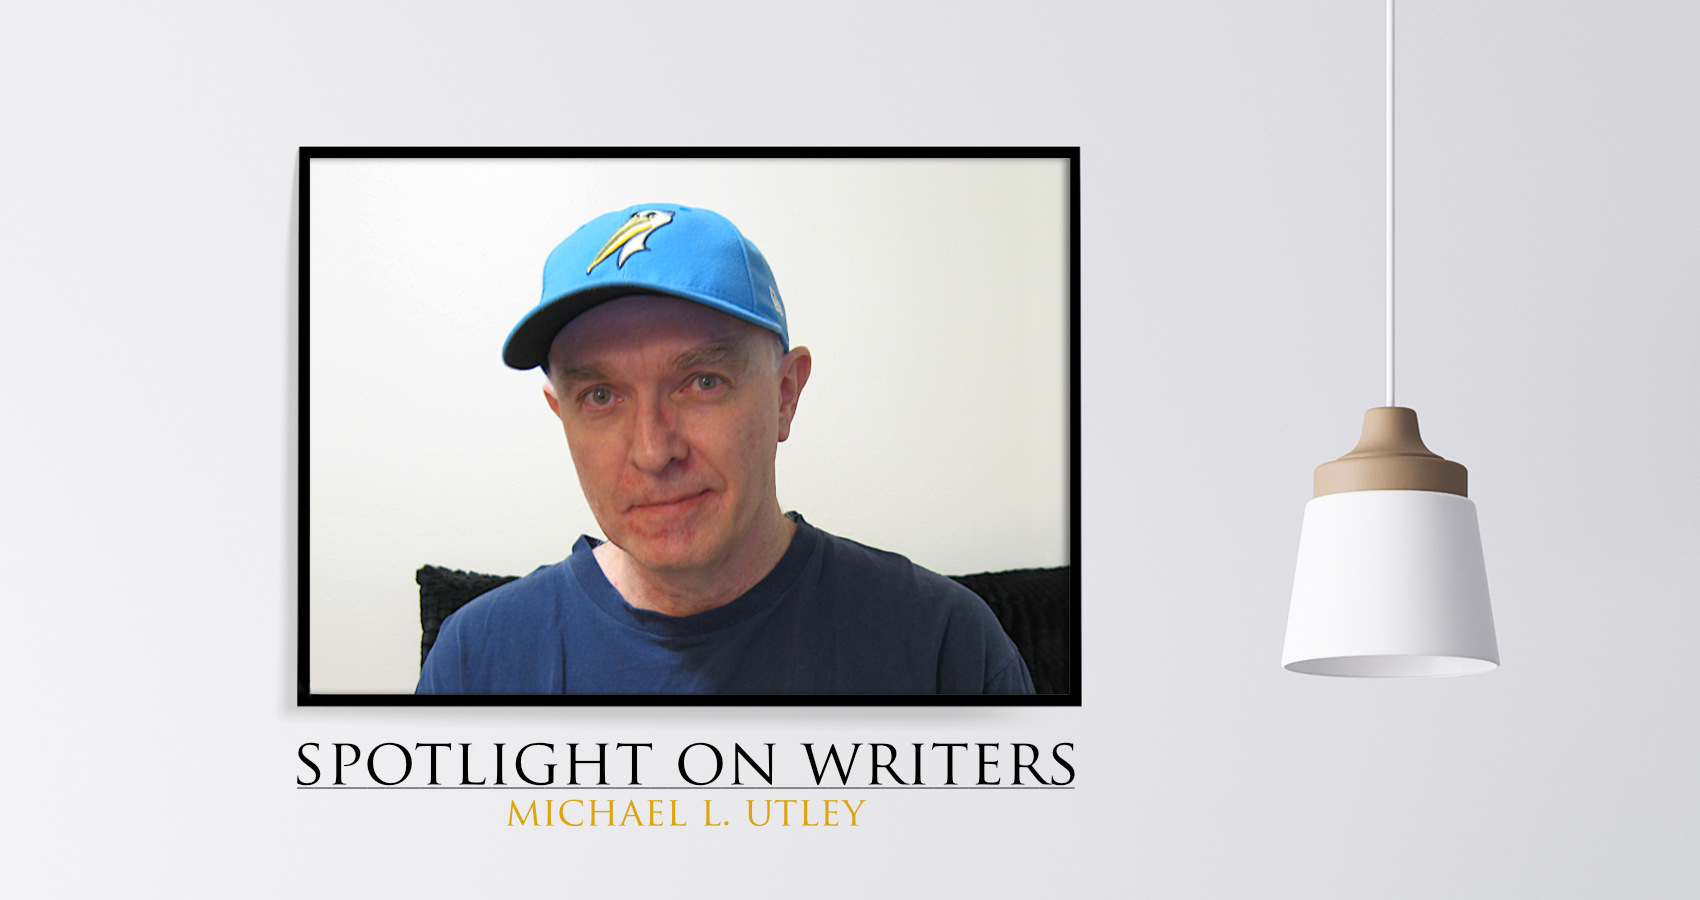 Spotlight On Writers - Michael L. Utley, interview at Spillwords.com